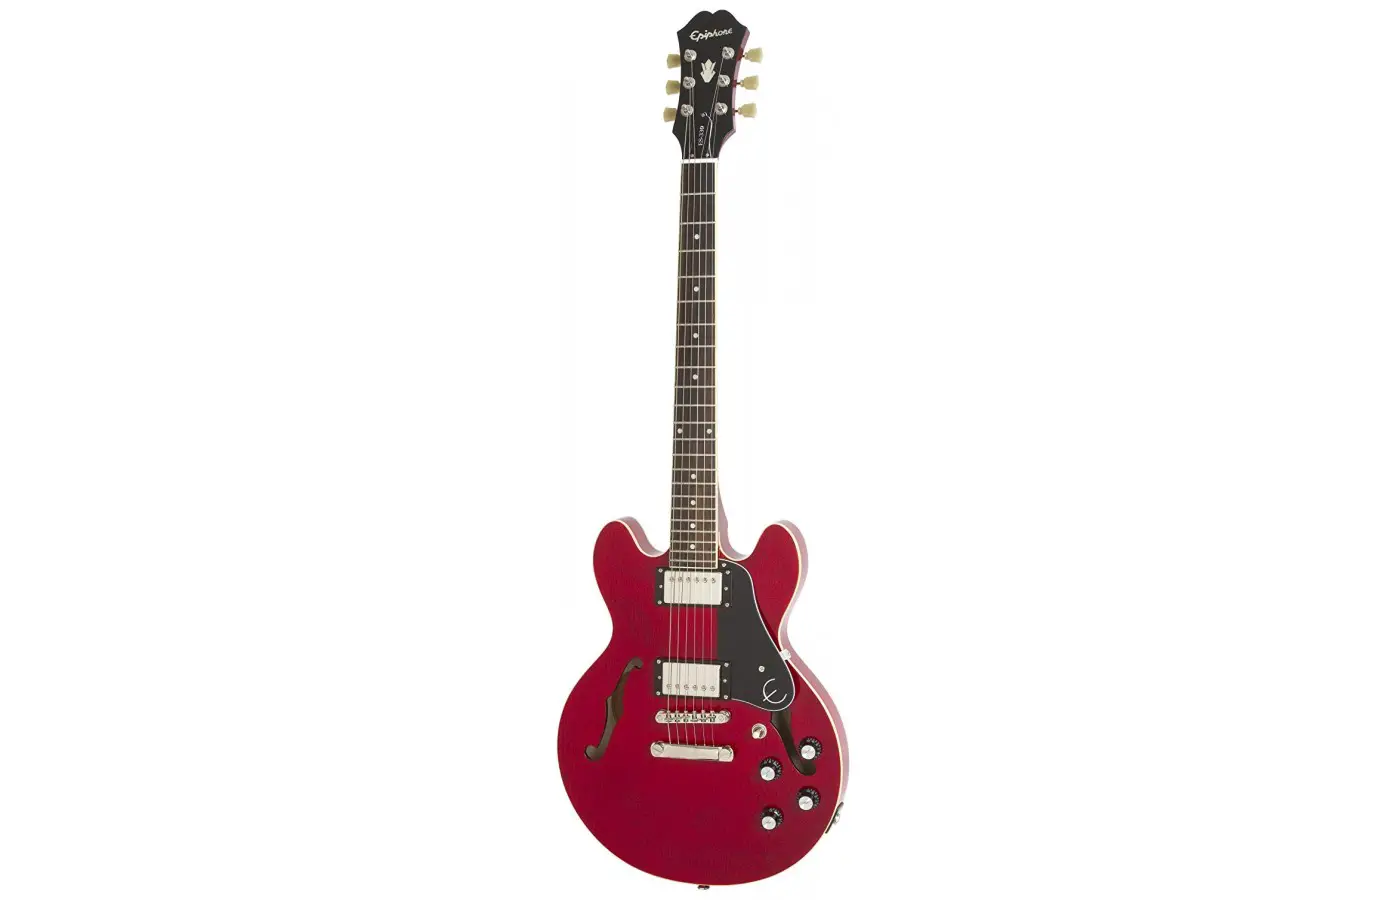 The Gibson ES-339 is a versatile addition to the Gibson guitar family.